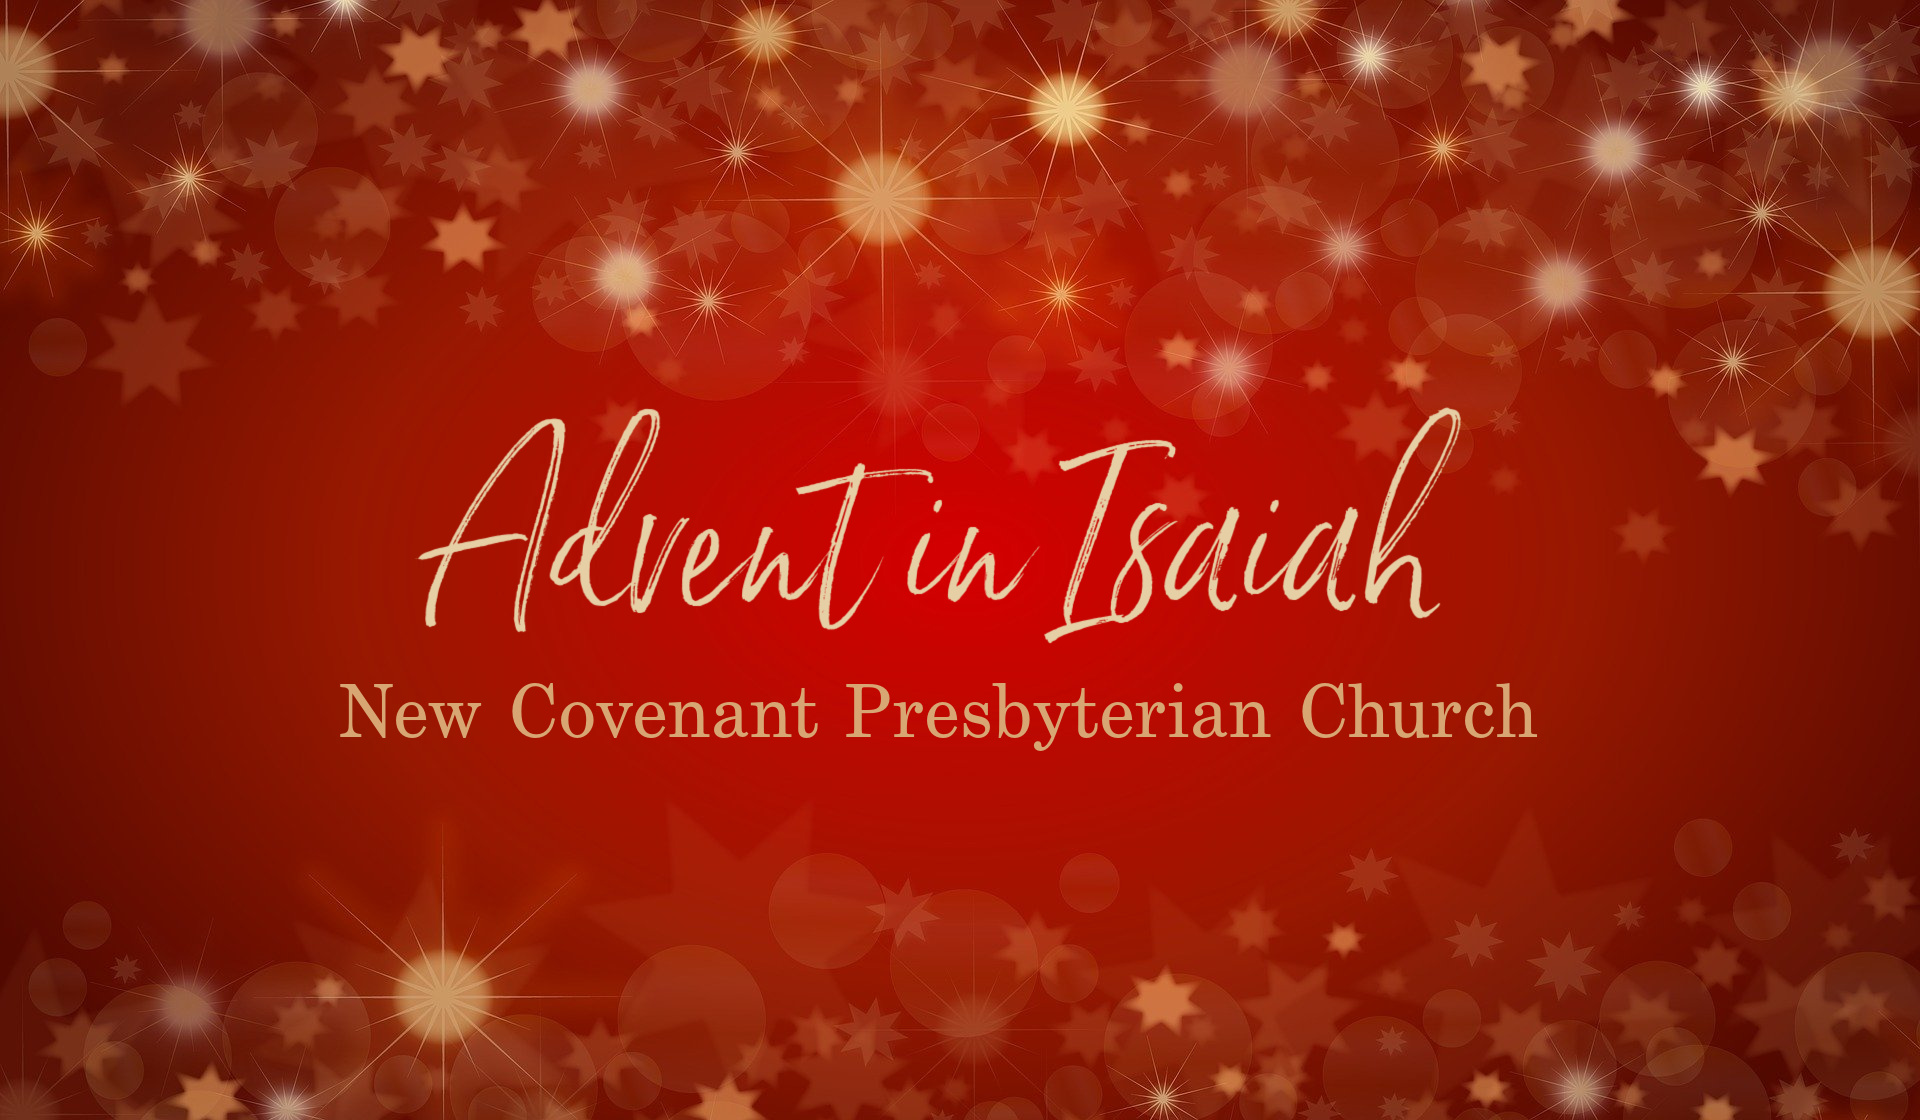 Advent in Isaiah